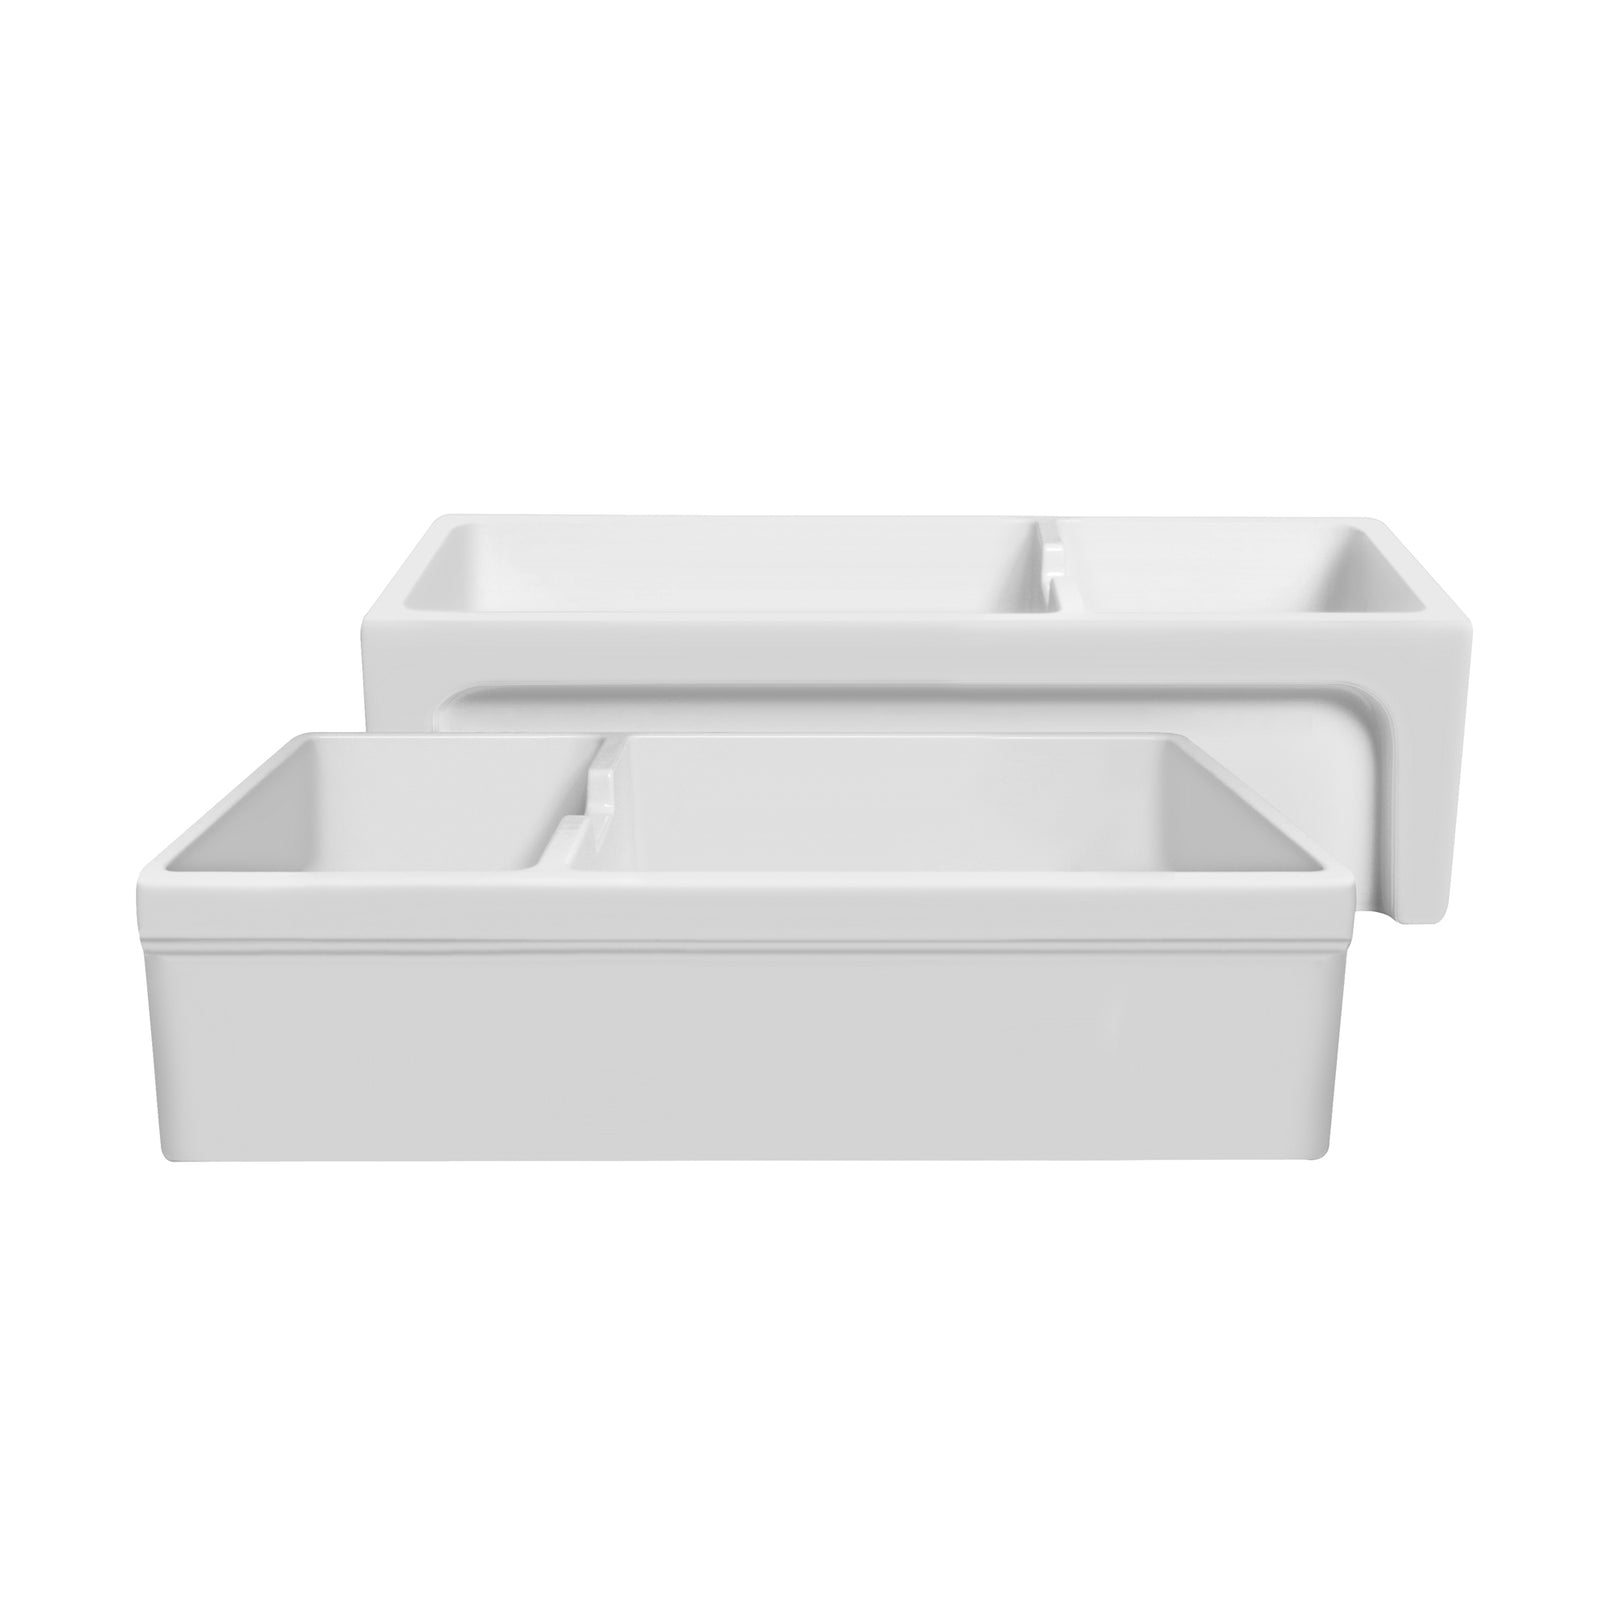 43 Pearlhaus Stainless steel double bowl freestanding utility sink -  Whitehaus Collection